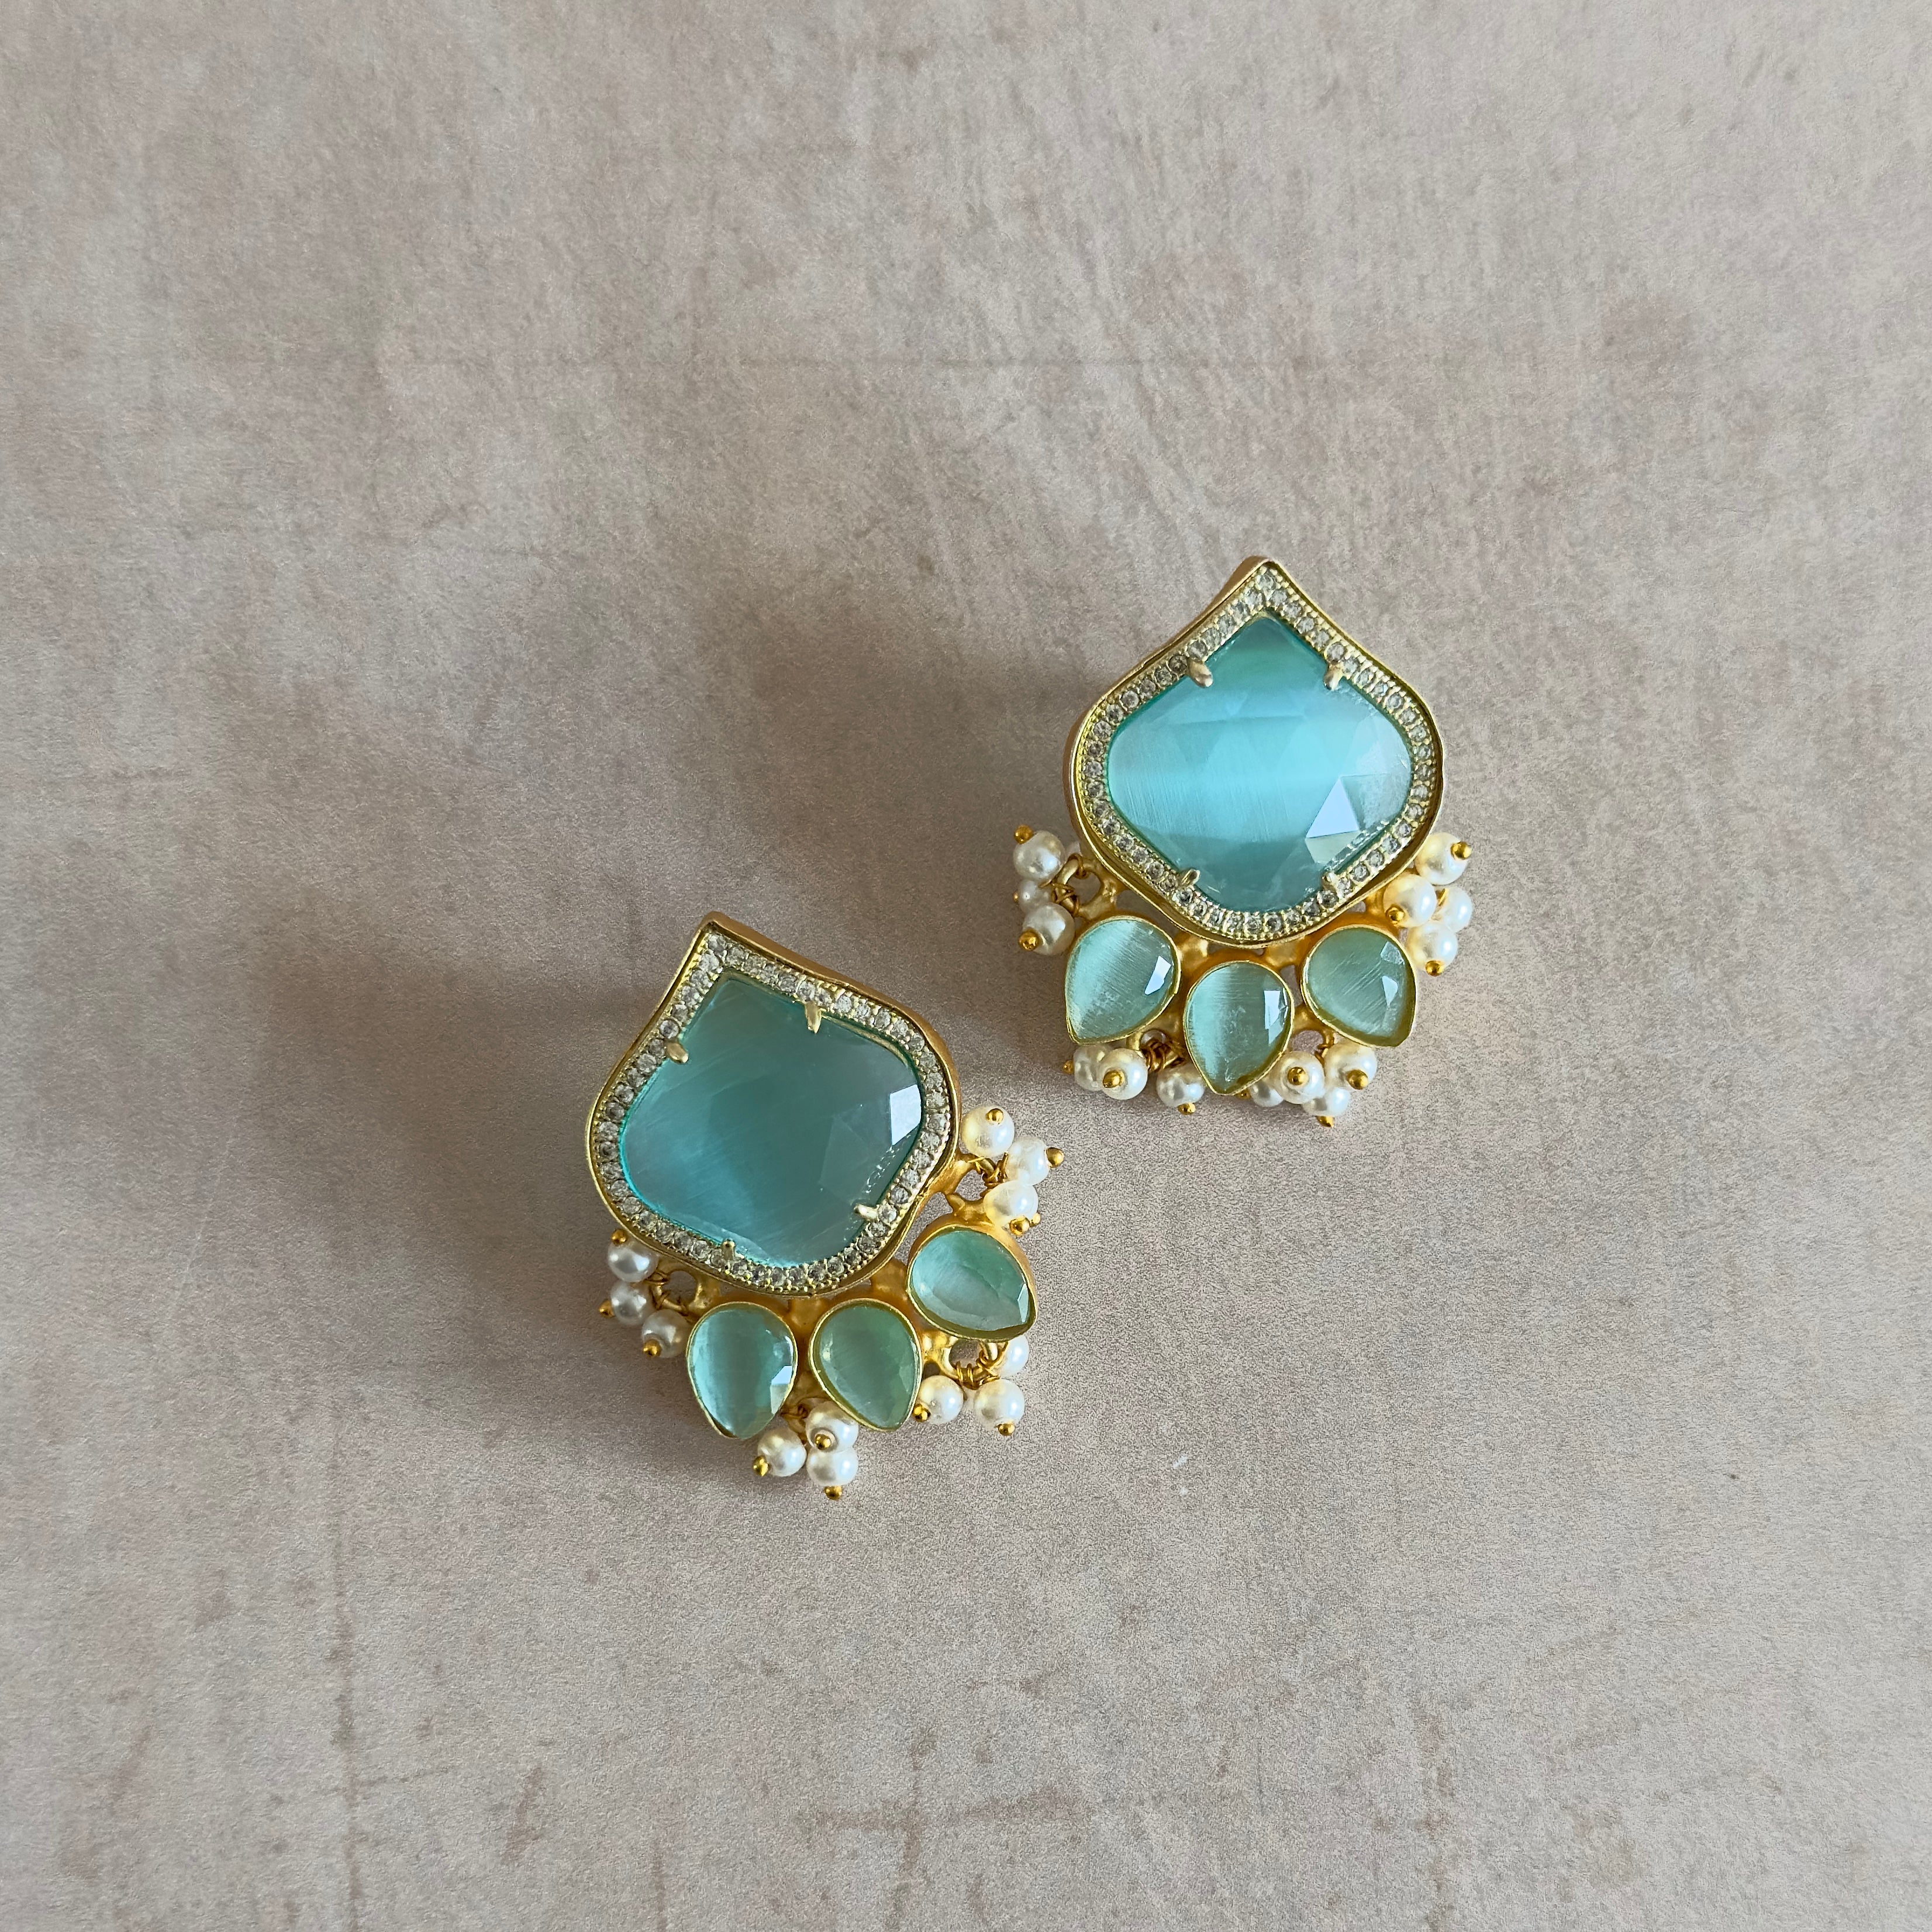 Indulge in effortless elegance with our Aria Mint Stud Earrings. The vibrant mint stones add a pop of color, while the delicate and simple design exudes sophistication. Elevate any outfit with these must-have earrings.